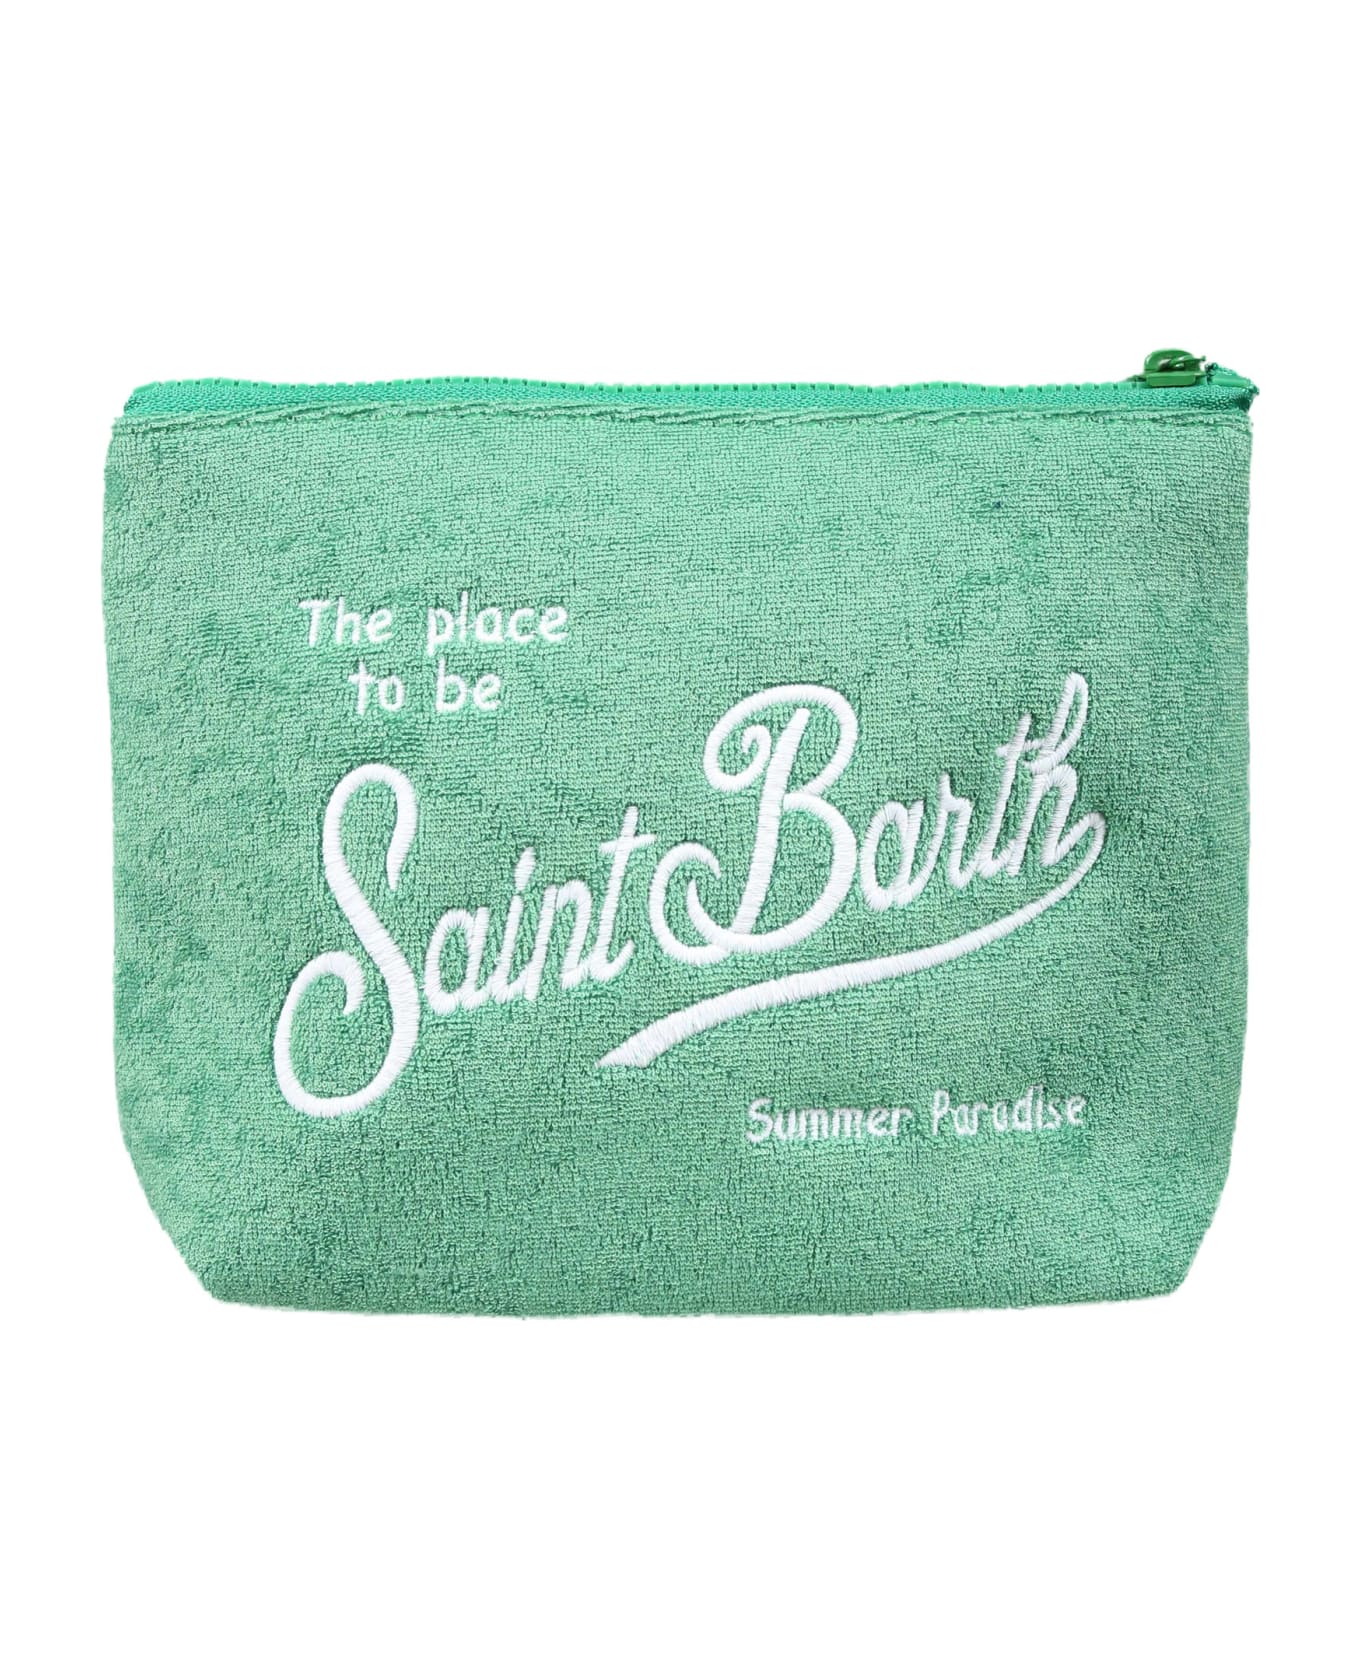 MC2 Saint Barth Green Clutch Bag For Kids With Logo - Green アクセサリー＆ギフト